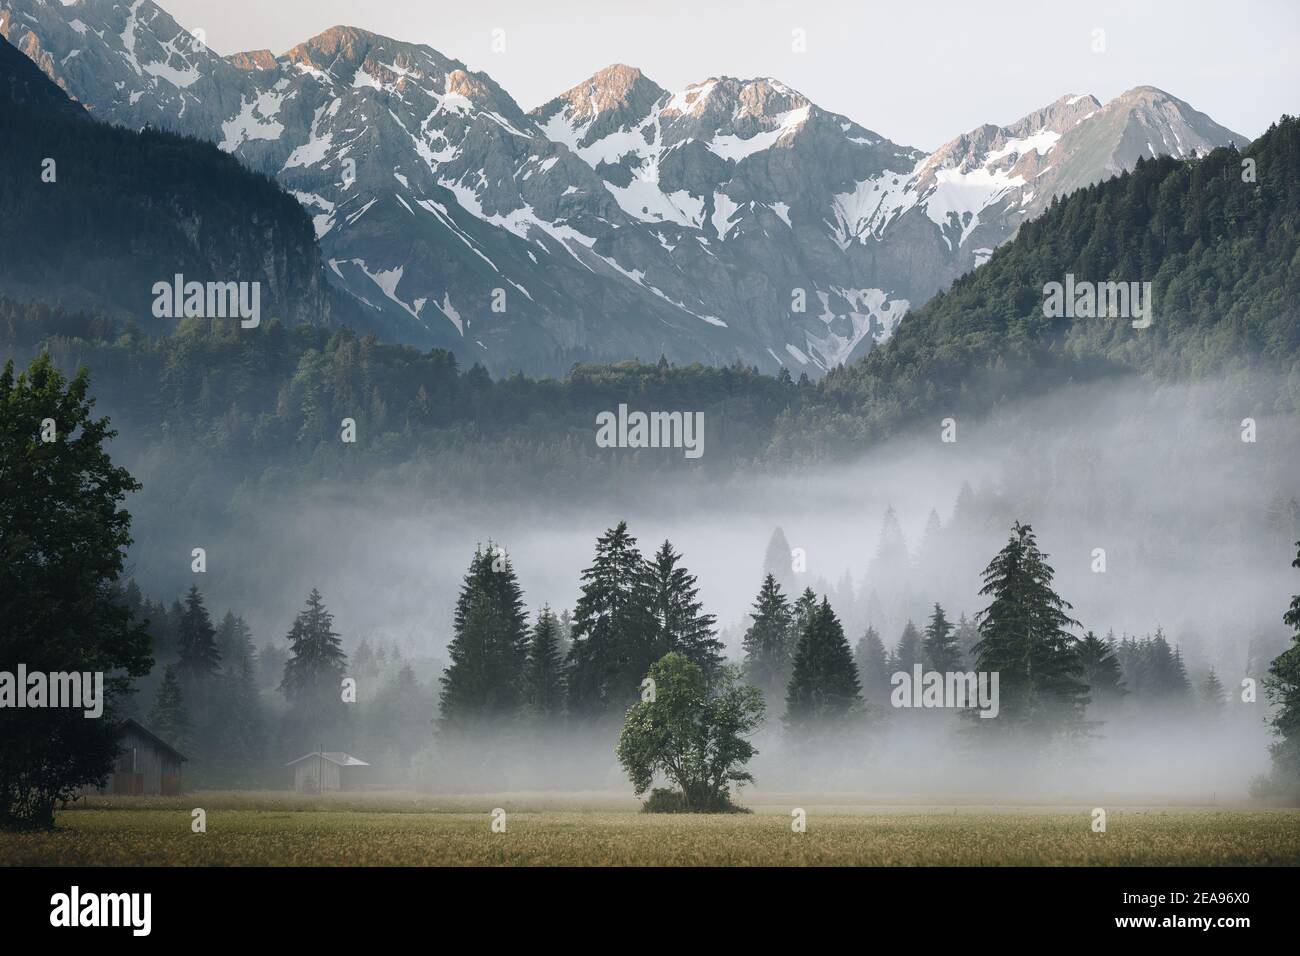 Sunrise over a meadow near Oberstdorf. In the background, the Allgäu high Alps extend behind foggy trees and forests / forest sections Stock Photo